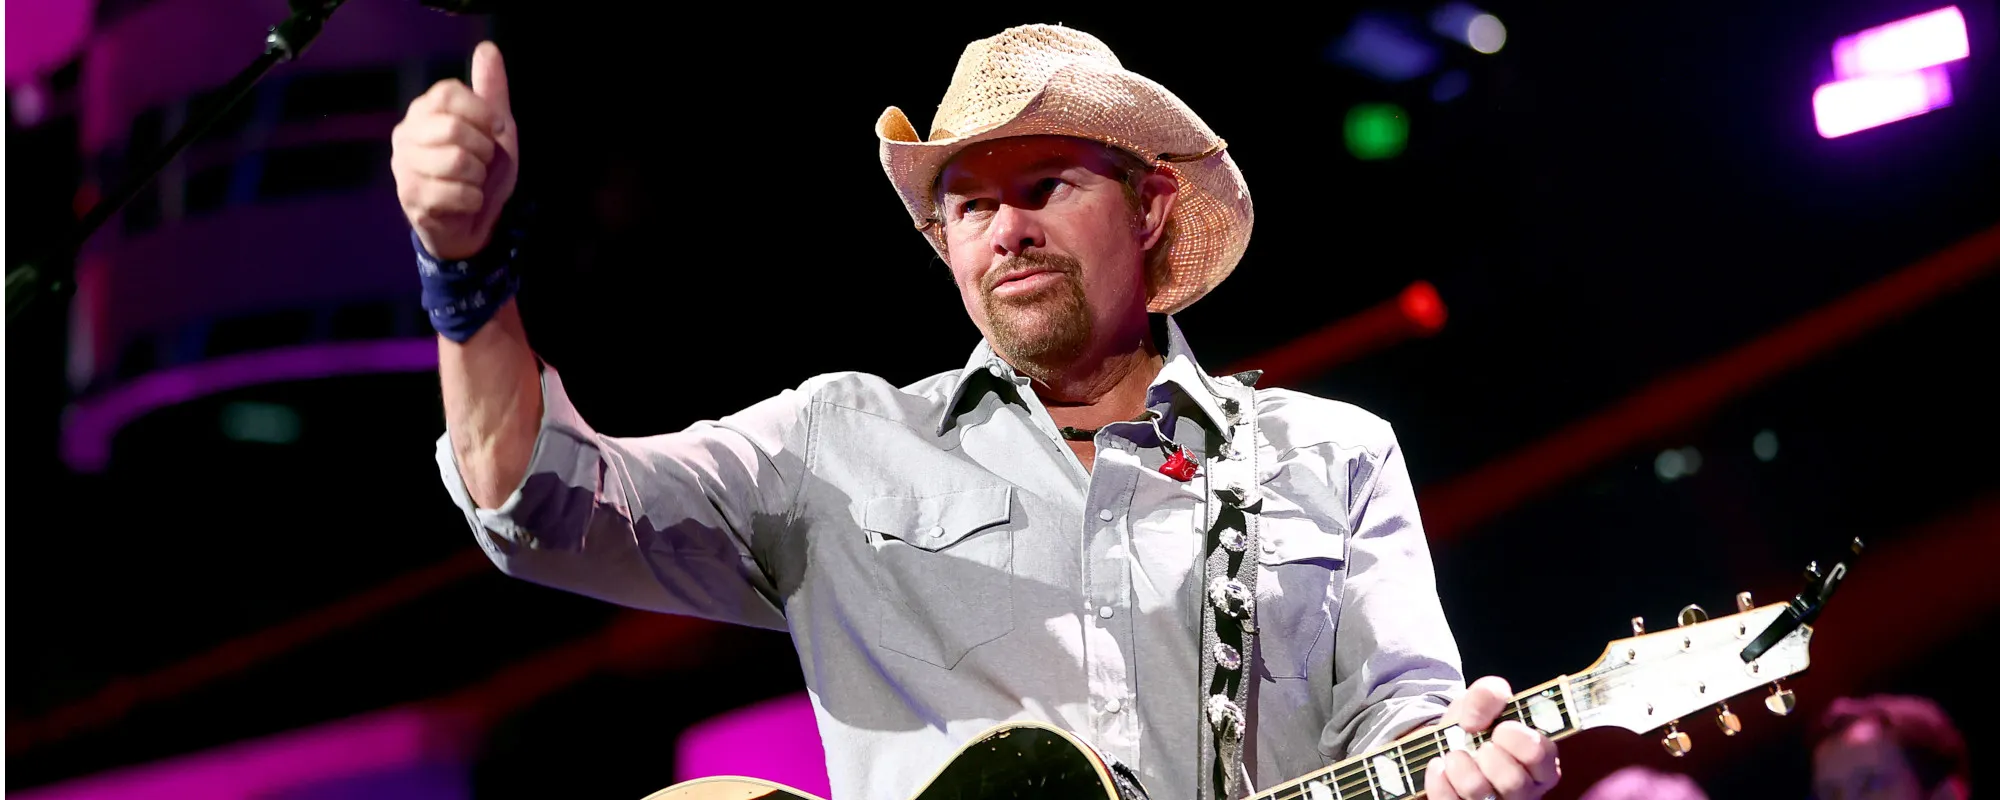 Toby Keith Hits New Career Milestone After Death as Country Legend’s Legacy Lives On